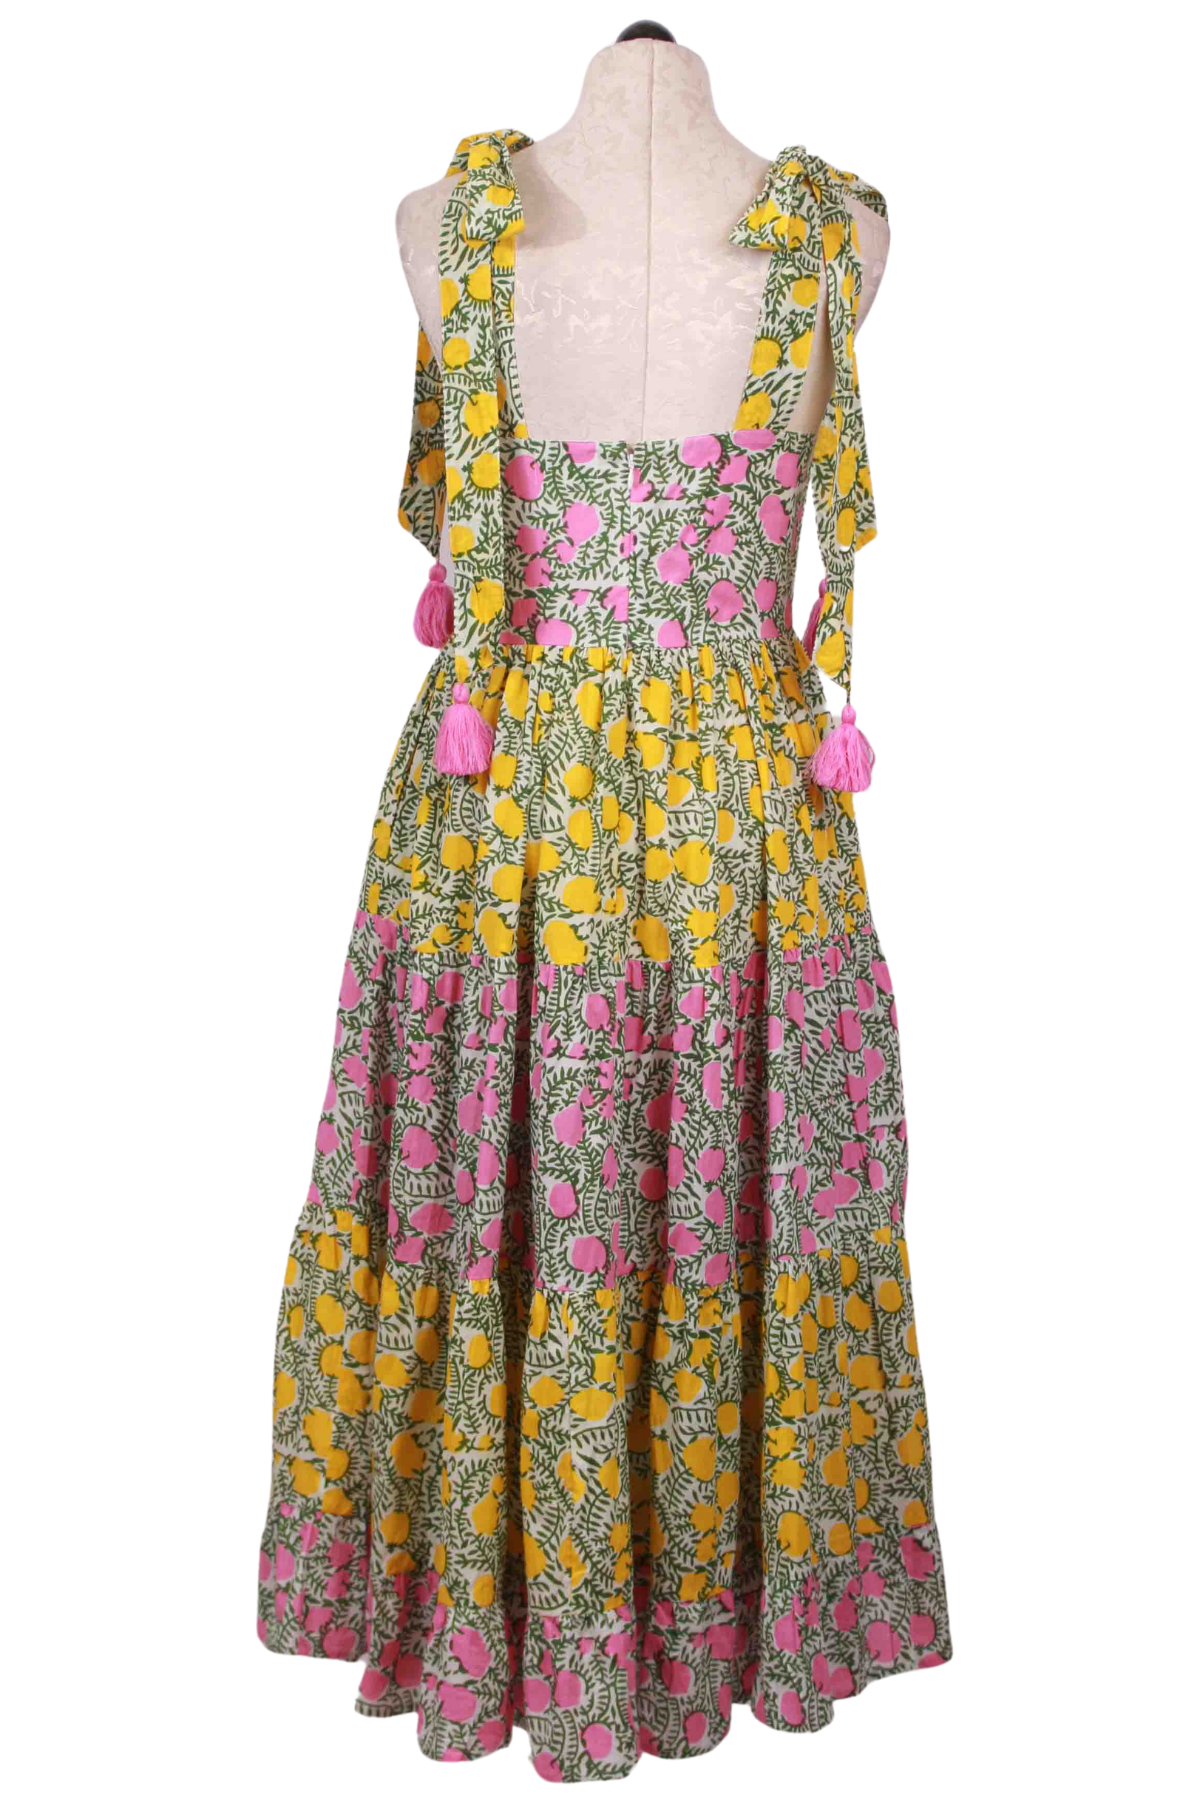 back view of Patchwork Lemonade Midi Length Daphne Dress by Mille with a zipper back